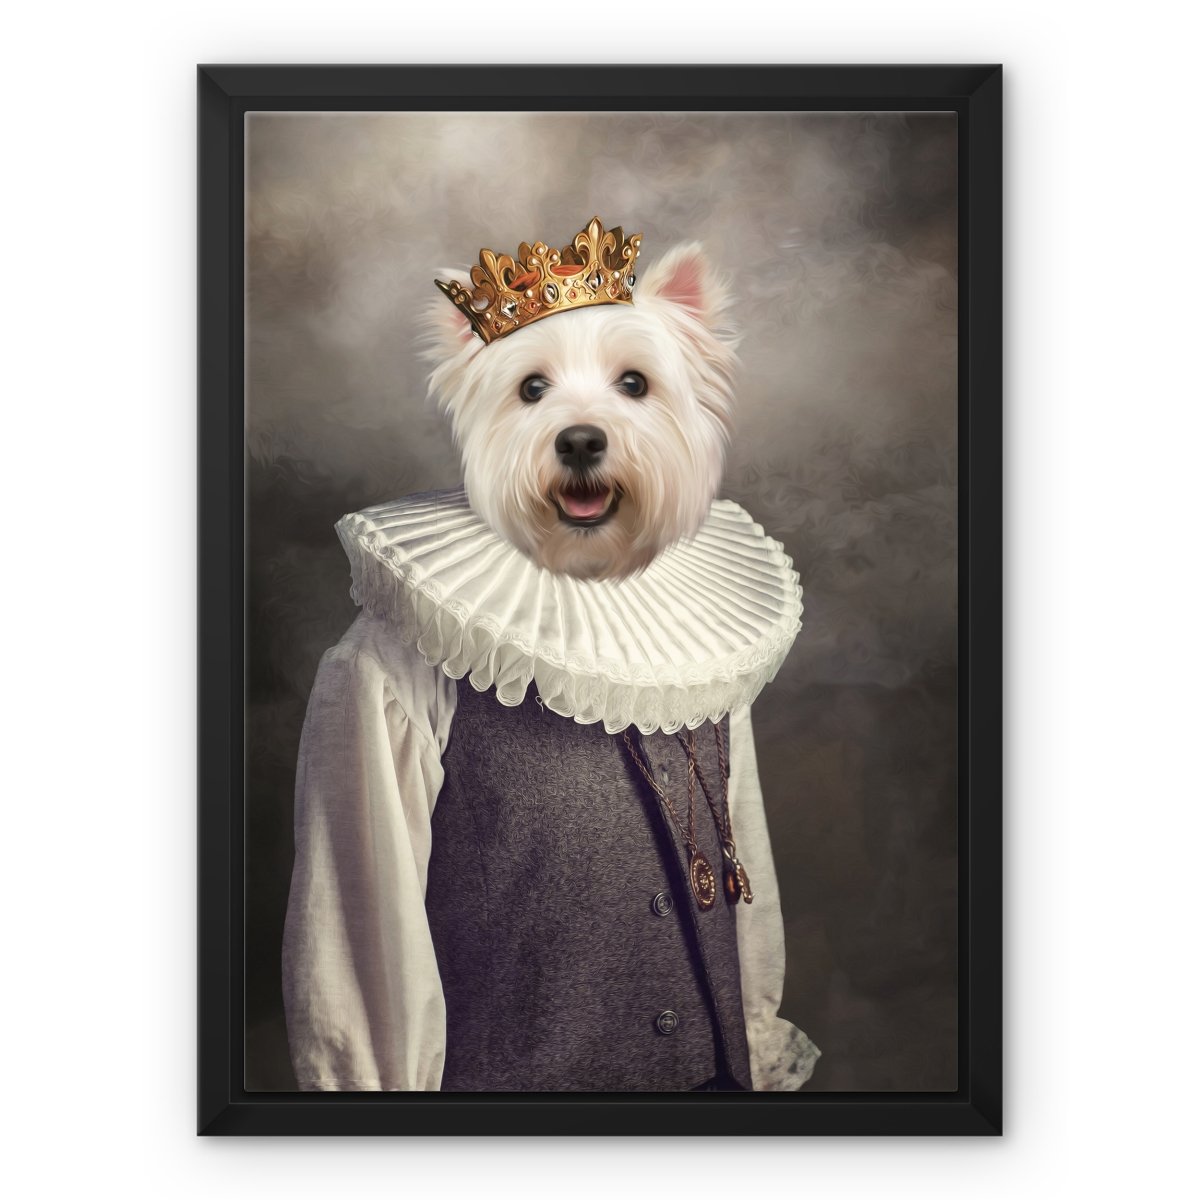 The Young Prince: Custom Pet Canvas - Paw & Glory - #pet portraits# - #dog portraits# - #pet portraits uk#paw and glory, pet portraits canvas,personalized dog canvas, canvas of my dog, personalized dog canvas print, custom canvas dog prints, custom pet canvas portraits